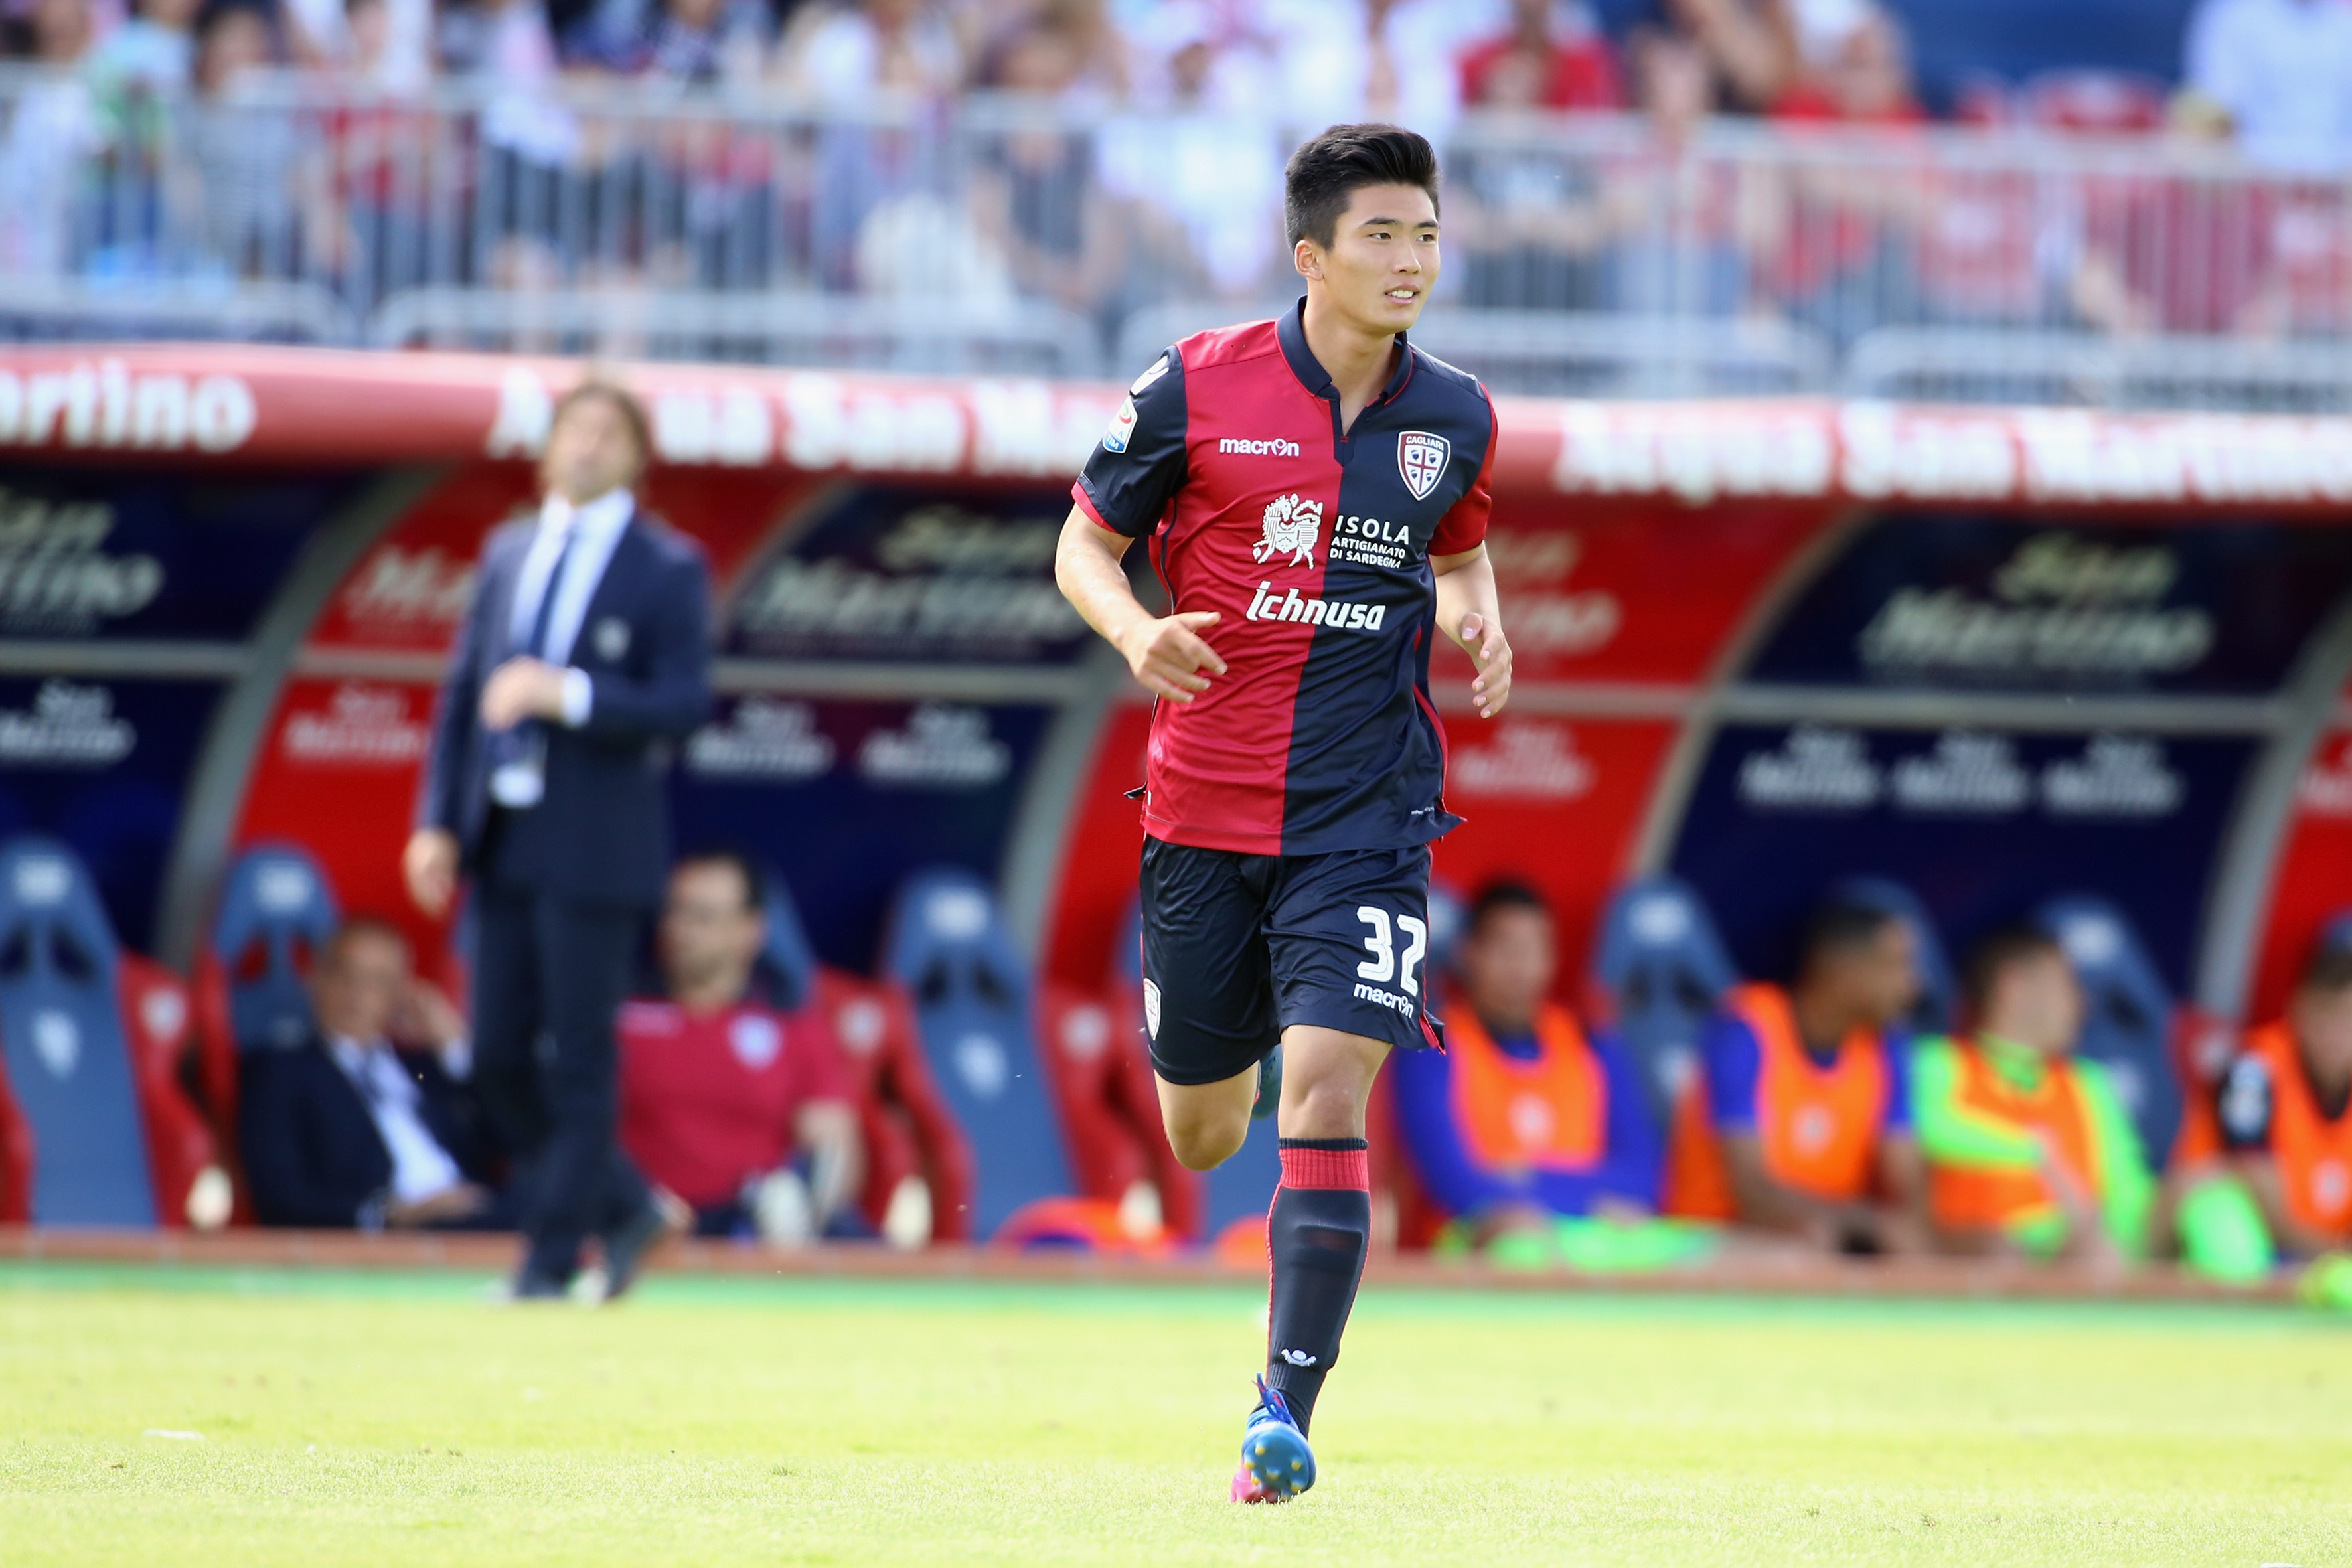 CAGLIARI, ITALY - MAY 14:  Kwang song Han of Cagliari in action during the Serie A match between Cagliari Calcio and Empoli FC at Stadio Sant'Elia on May 14, 2017 in Cagliari, Italy.  (Photo by Enrico Locci/Getty Images)